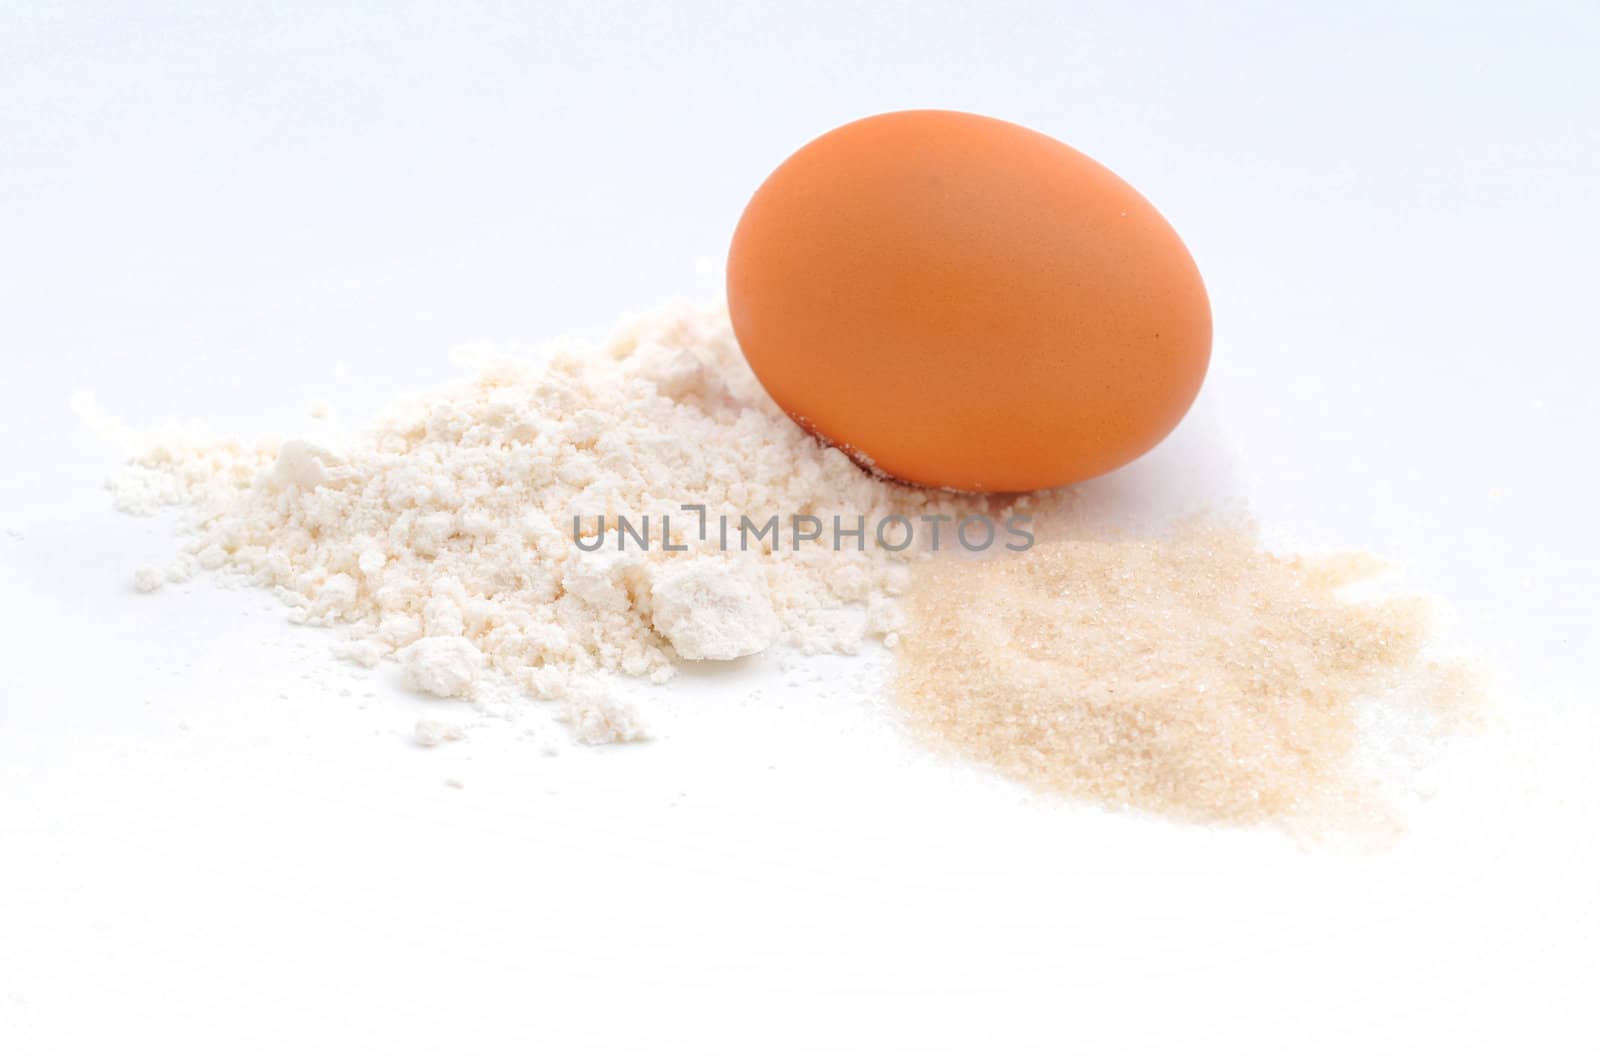 raw ingredients for baking which consists of an egg, flour and sugar